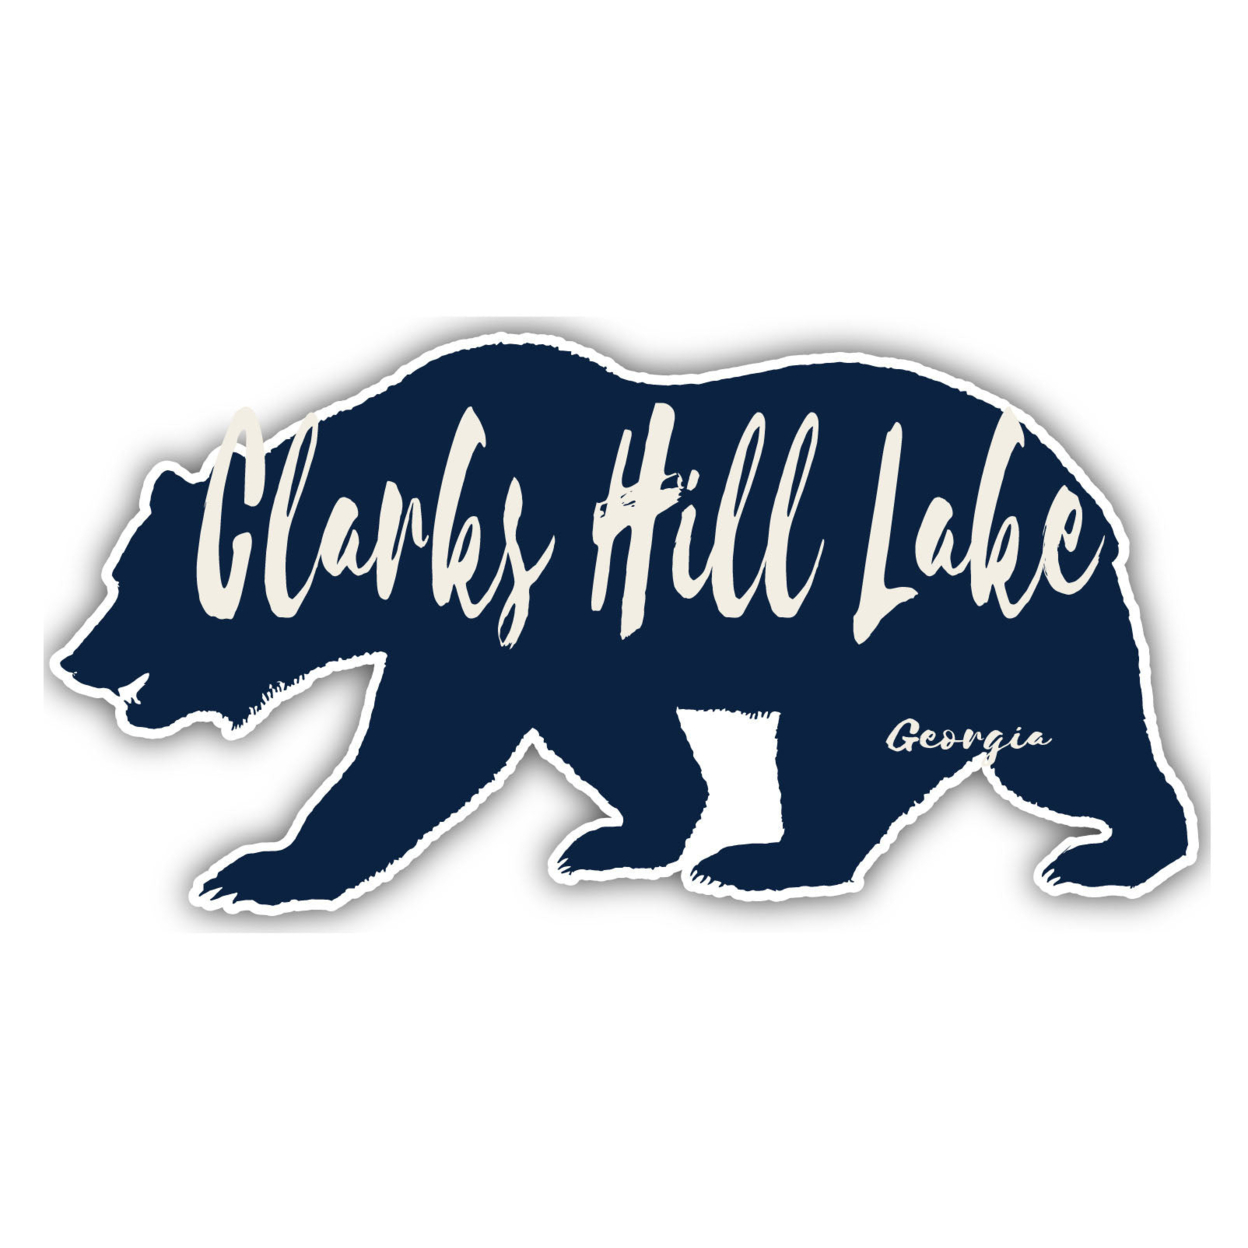 Clarks Hill Lake Georgia Souvenir Decorative Stickers (Choose Theme And Size) - 4-Pack, 6-Inch, Bear